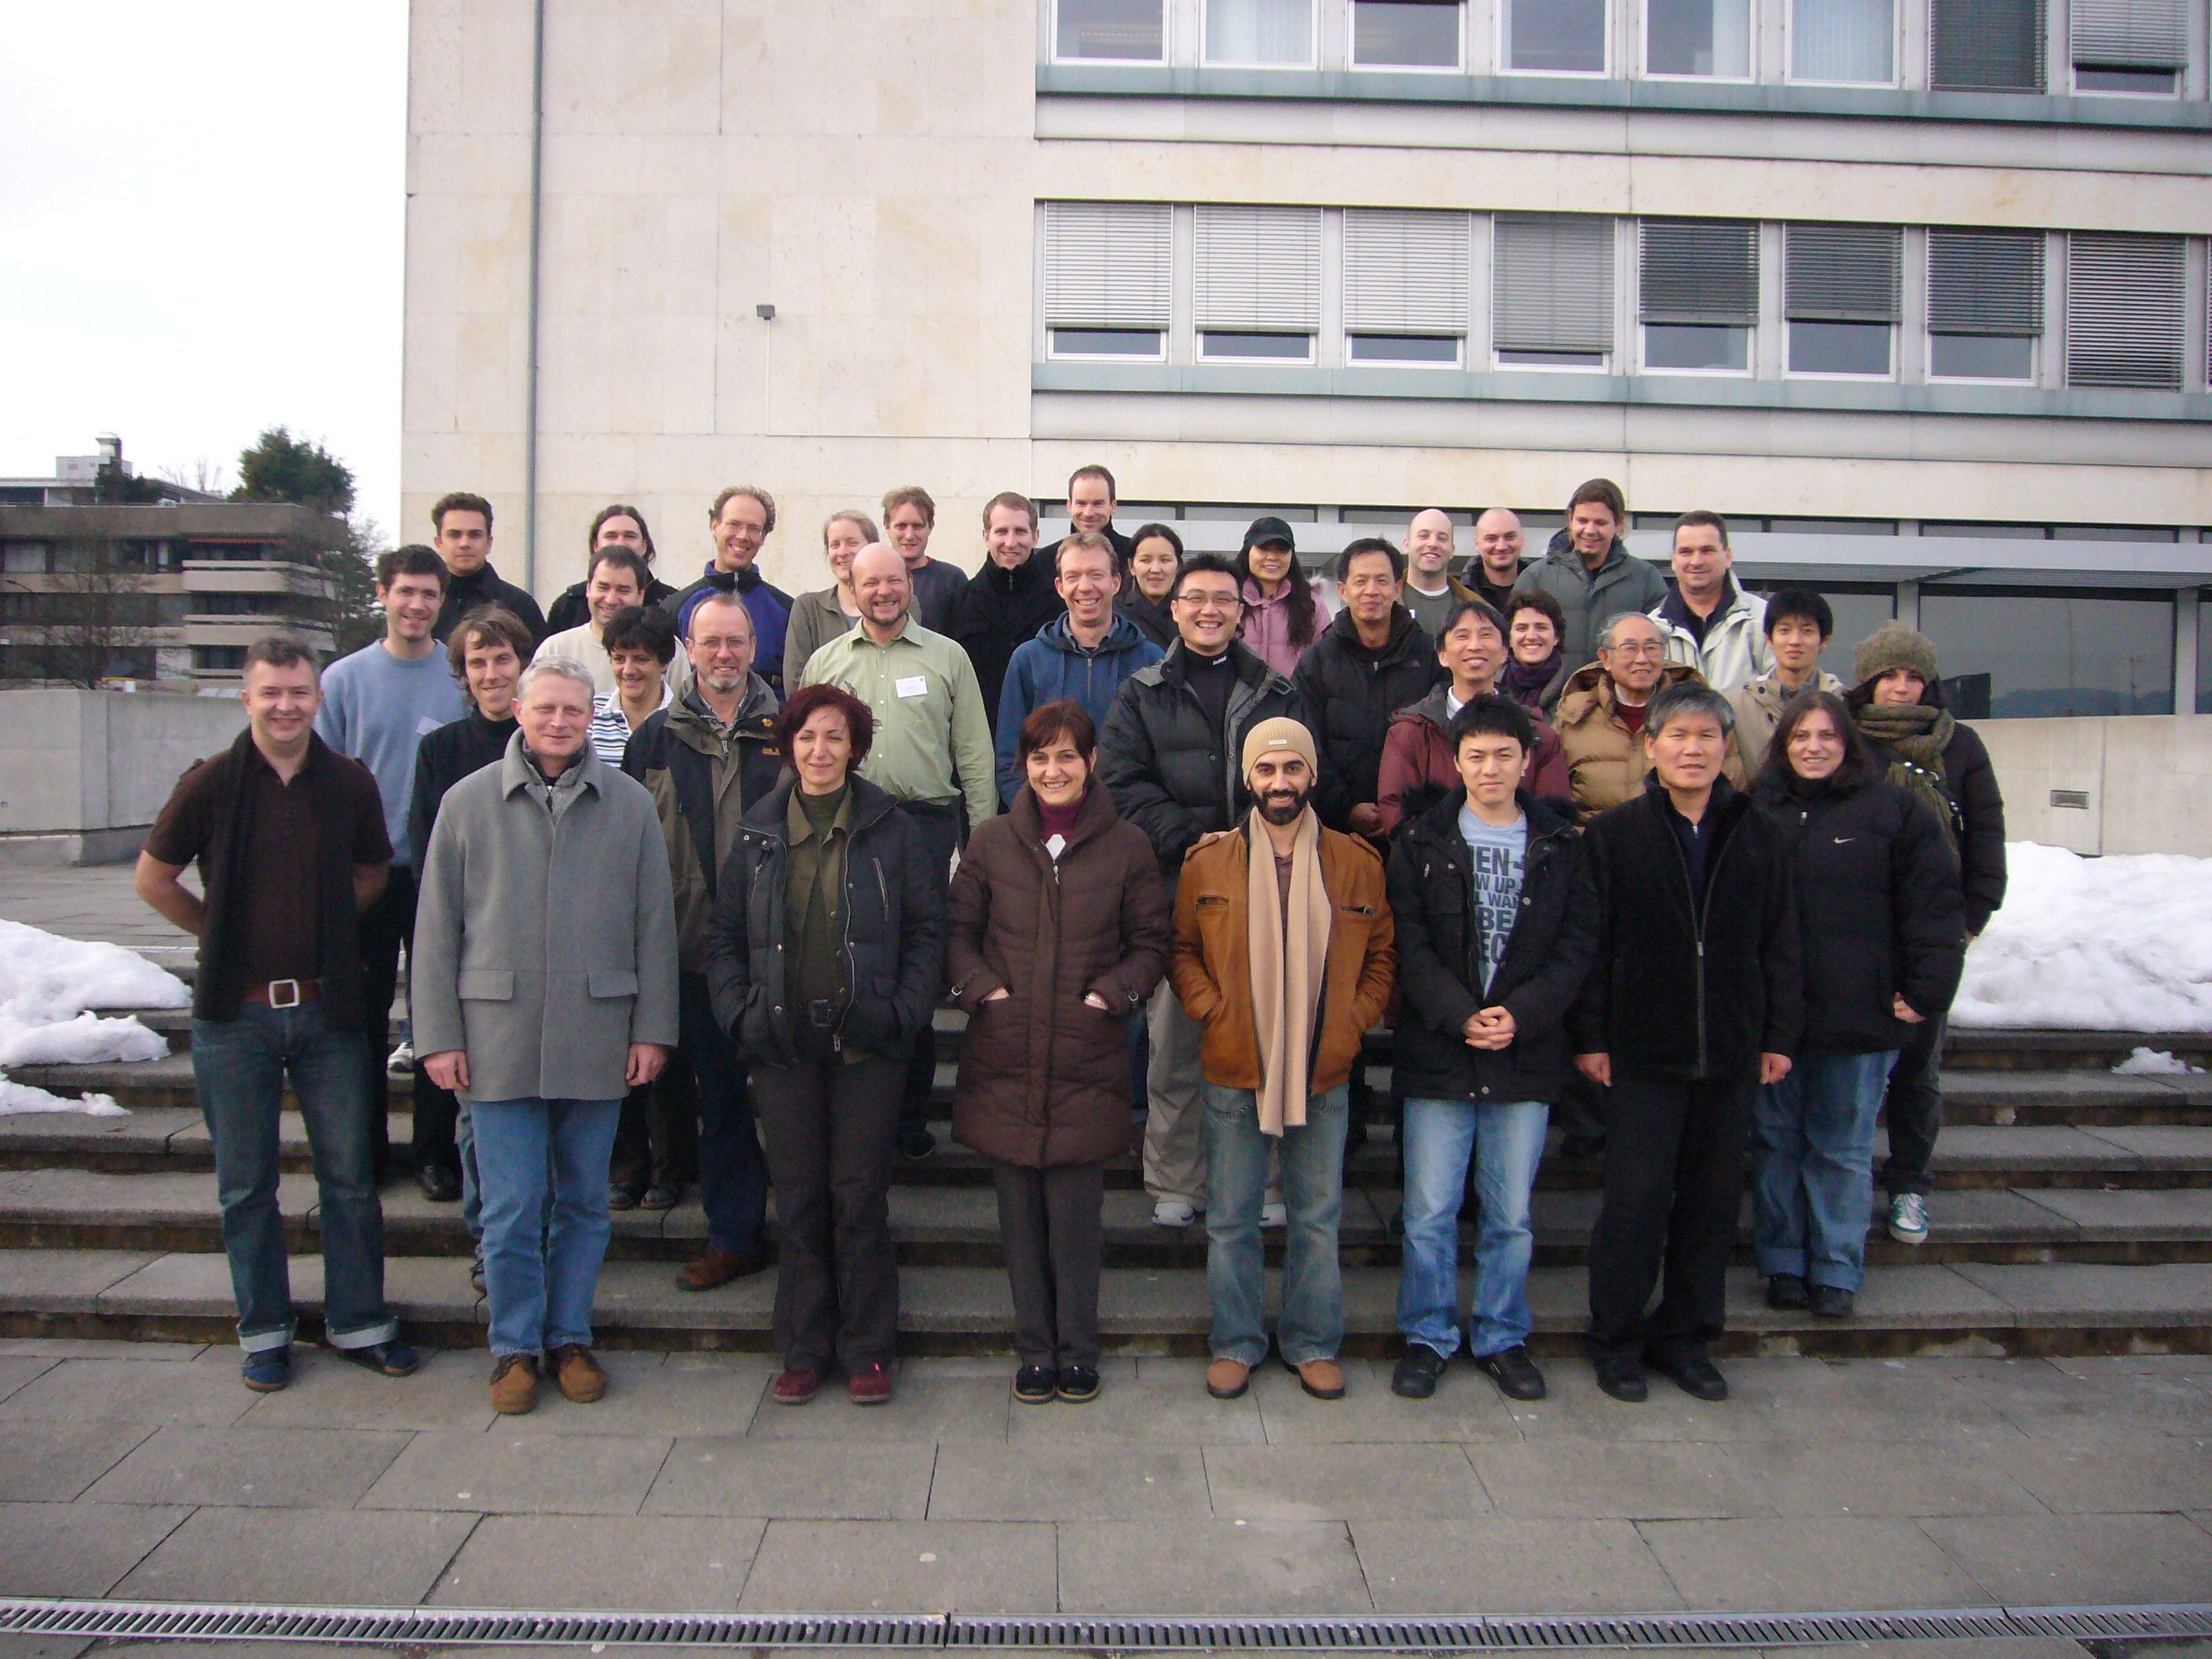 JPG Image of BSW Course
	Participants